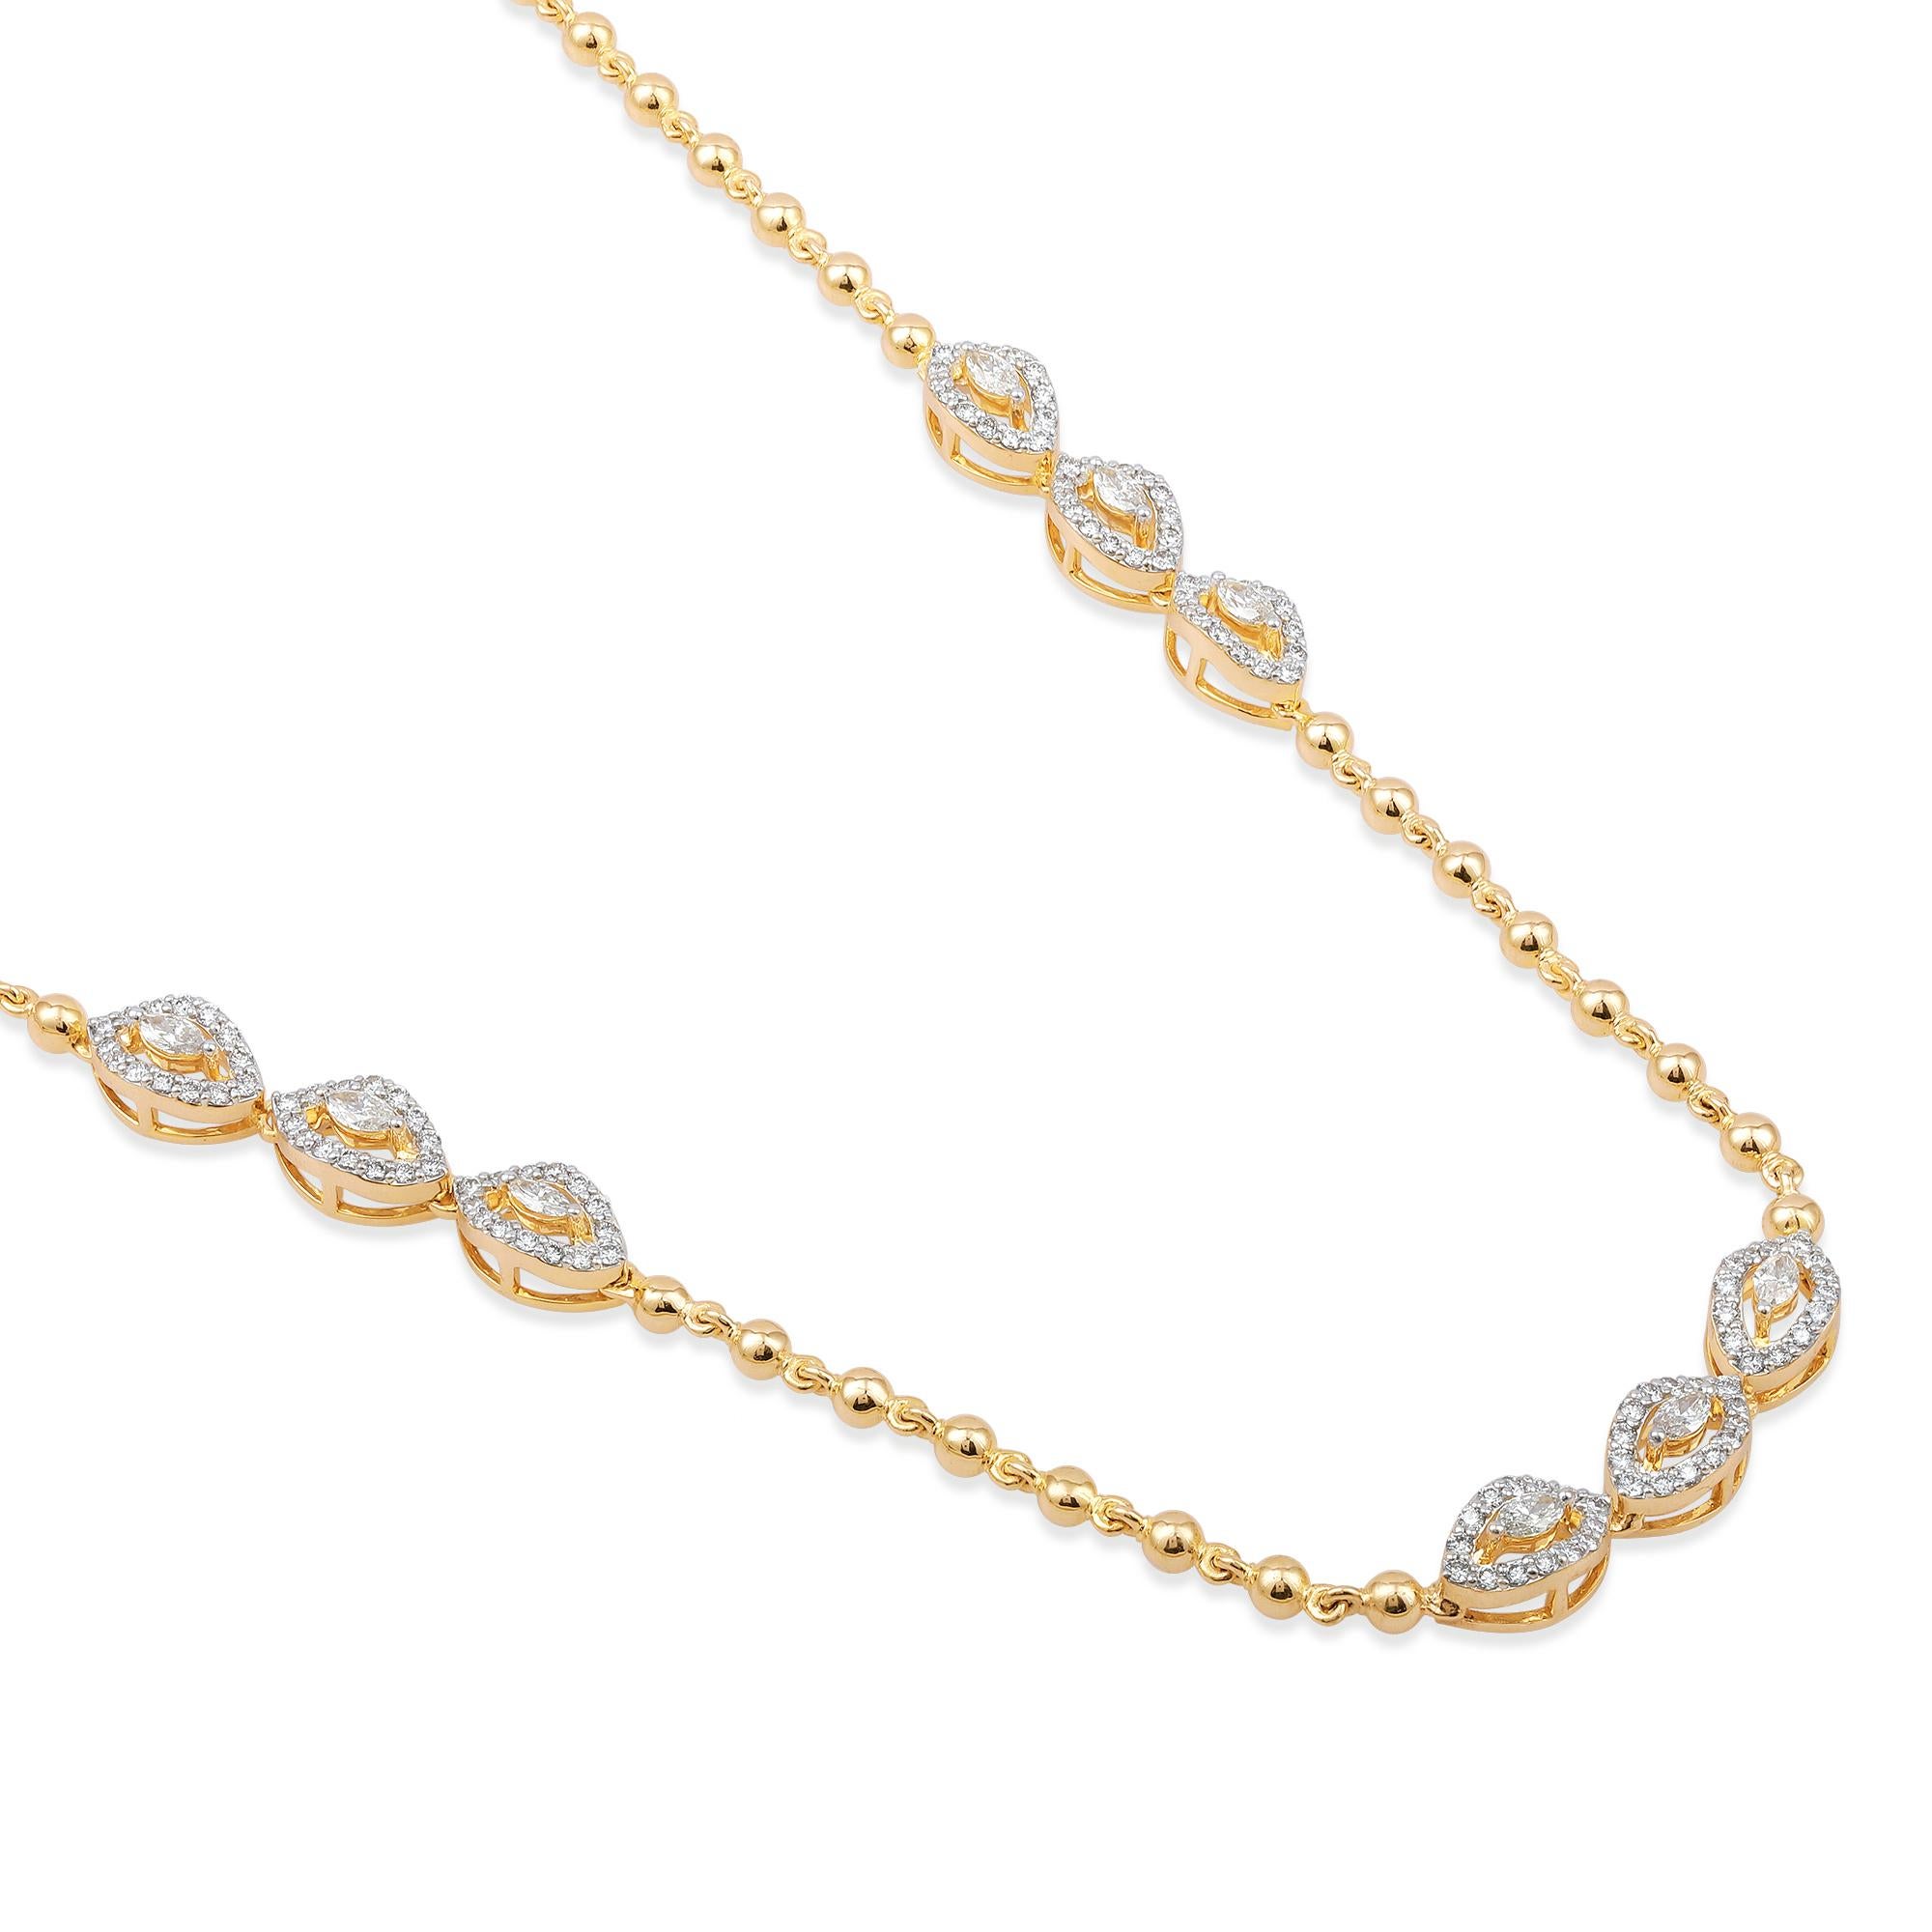 Crafted in 34.33 grams of 10-karat Yellow Gold, contains 210 Stones of Round Diamonds with a total of 3.00-Carats in G-H Color and VS Clarity combined with 15 Stones of Marquise Diamonds with a total of 2.08-Carats in I-J Color and SI Clarity. The